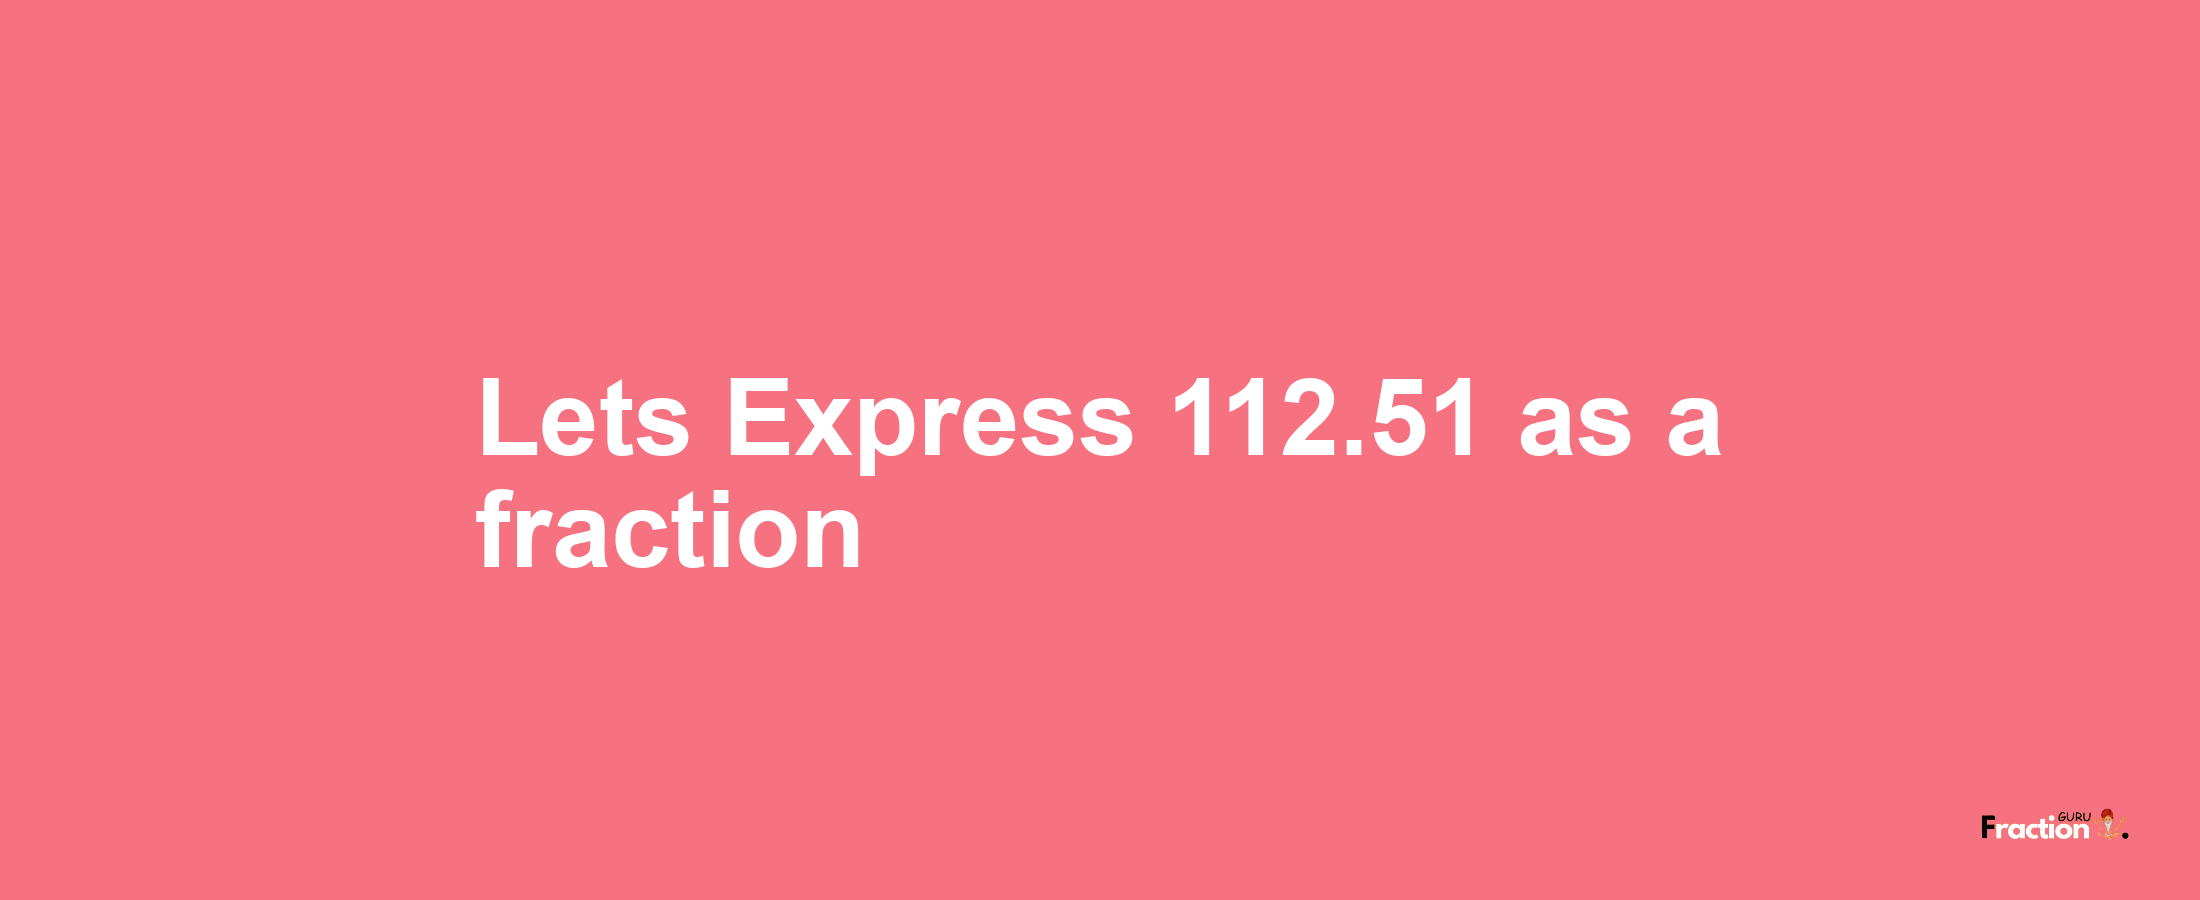 Lets Express 112.51 as afraction